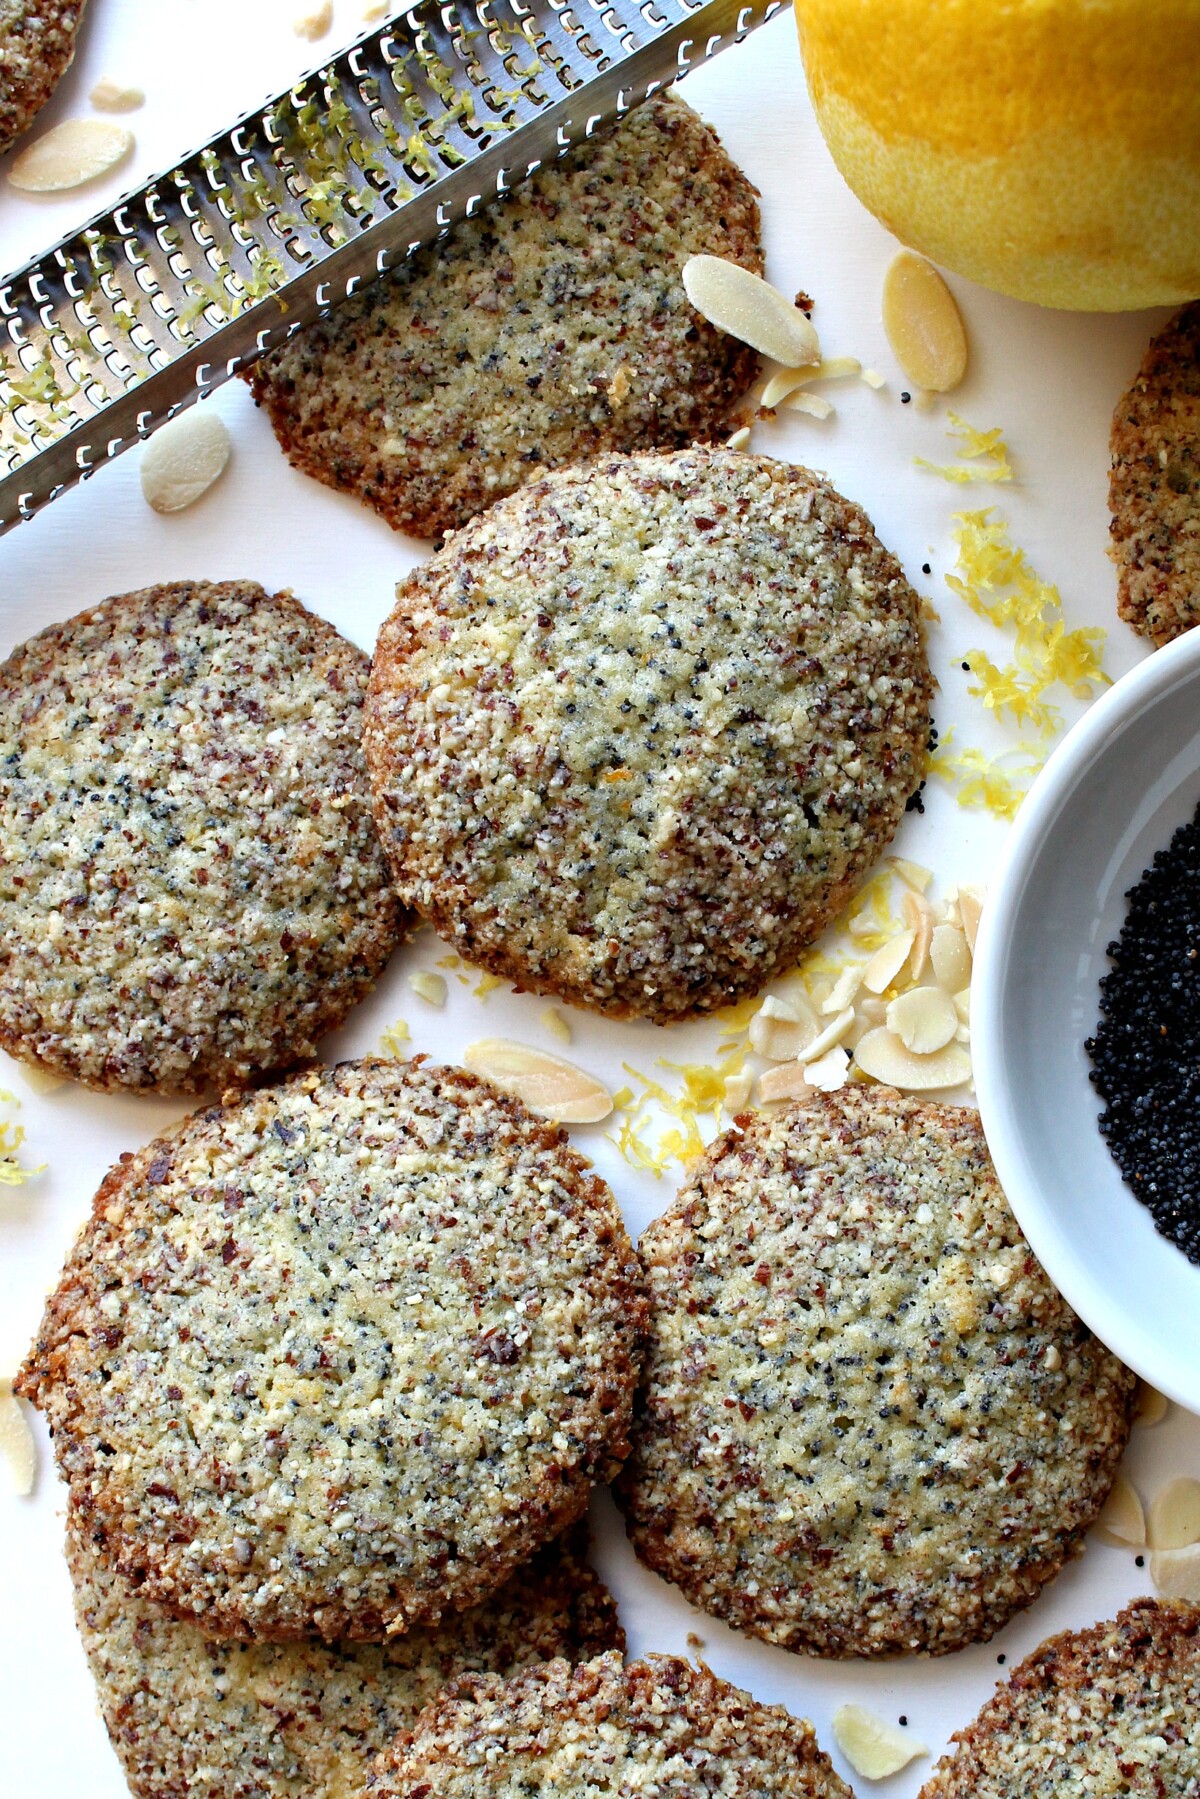 Crunchy Lemon Poppy Seed Cookies with almonds, poppy seeds, and lemon zest.